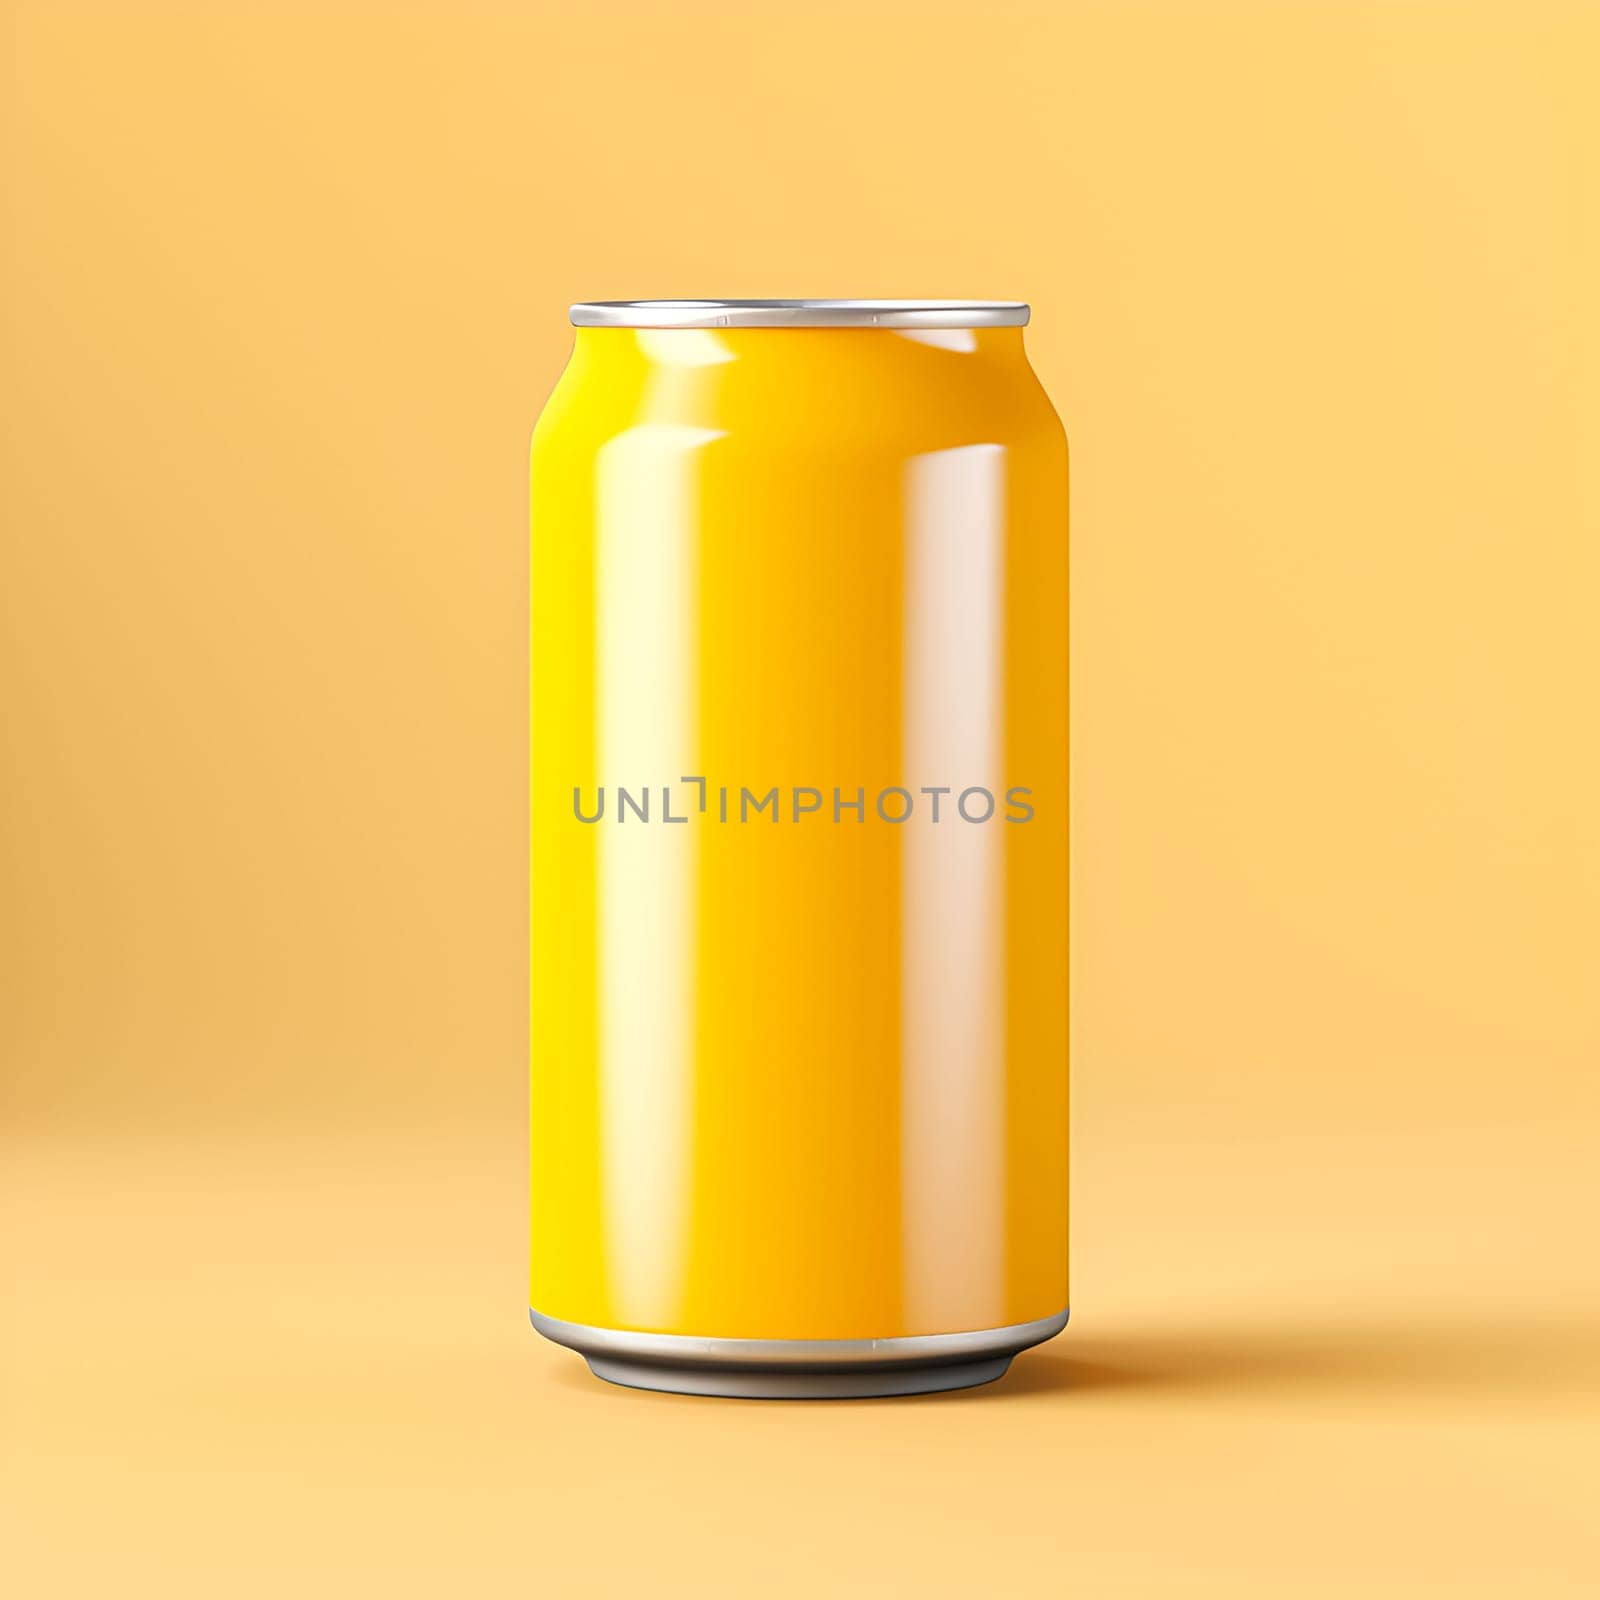 Yellow aluminum cans isolated on yellow background. Mockup for soda water, soft drinks concept, beer